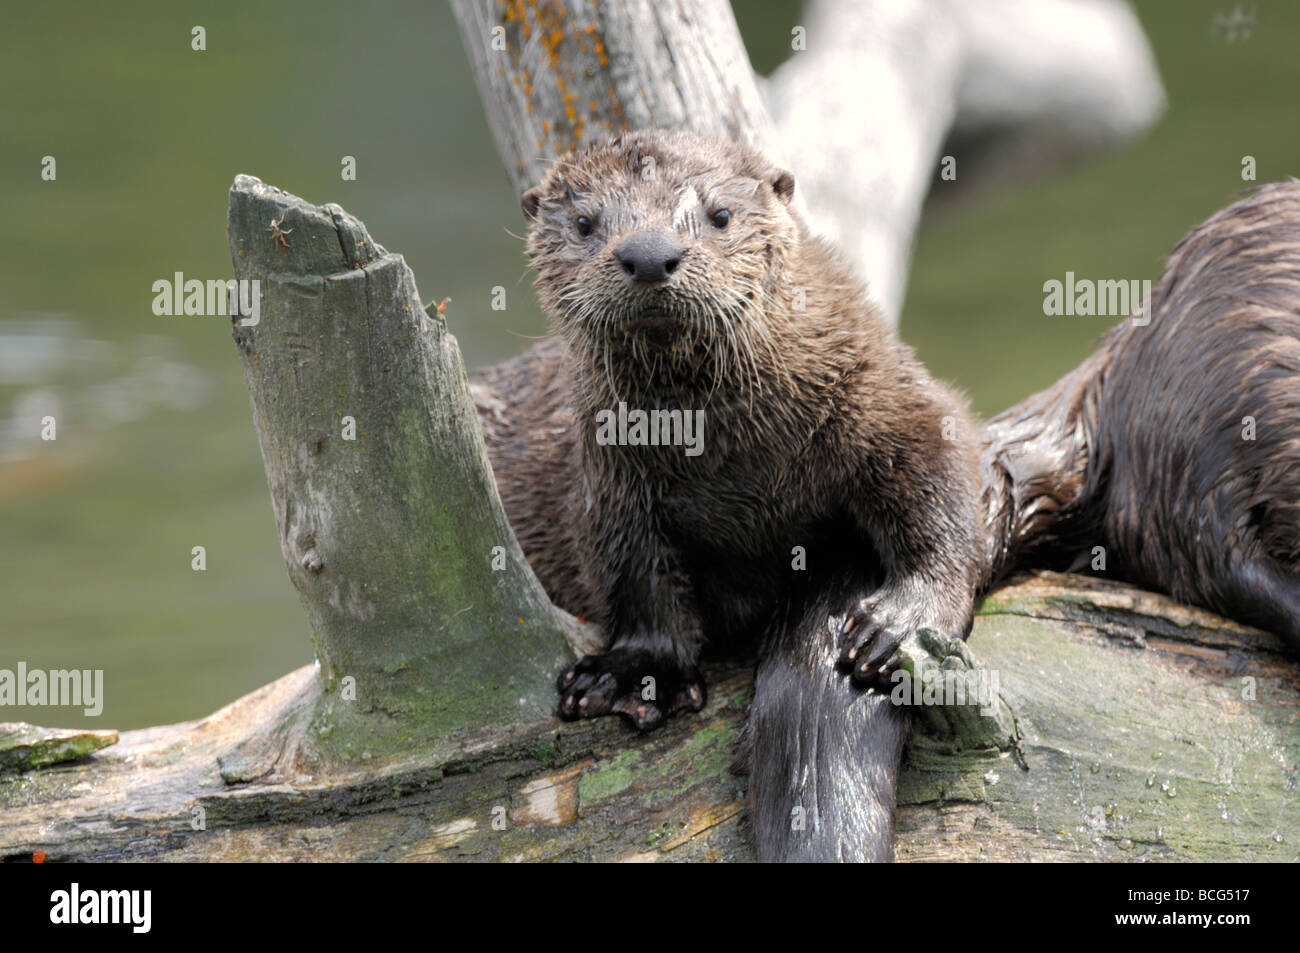 Stock photo of a river otter pup sitting on a log, Yellowstone National Park, July 2009. Stock Photo